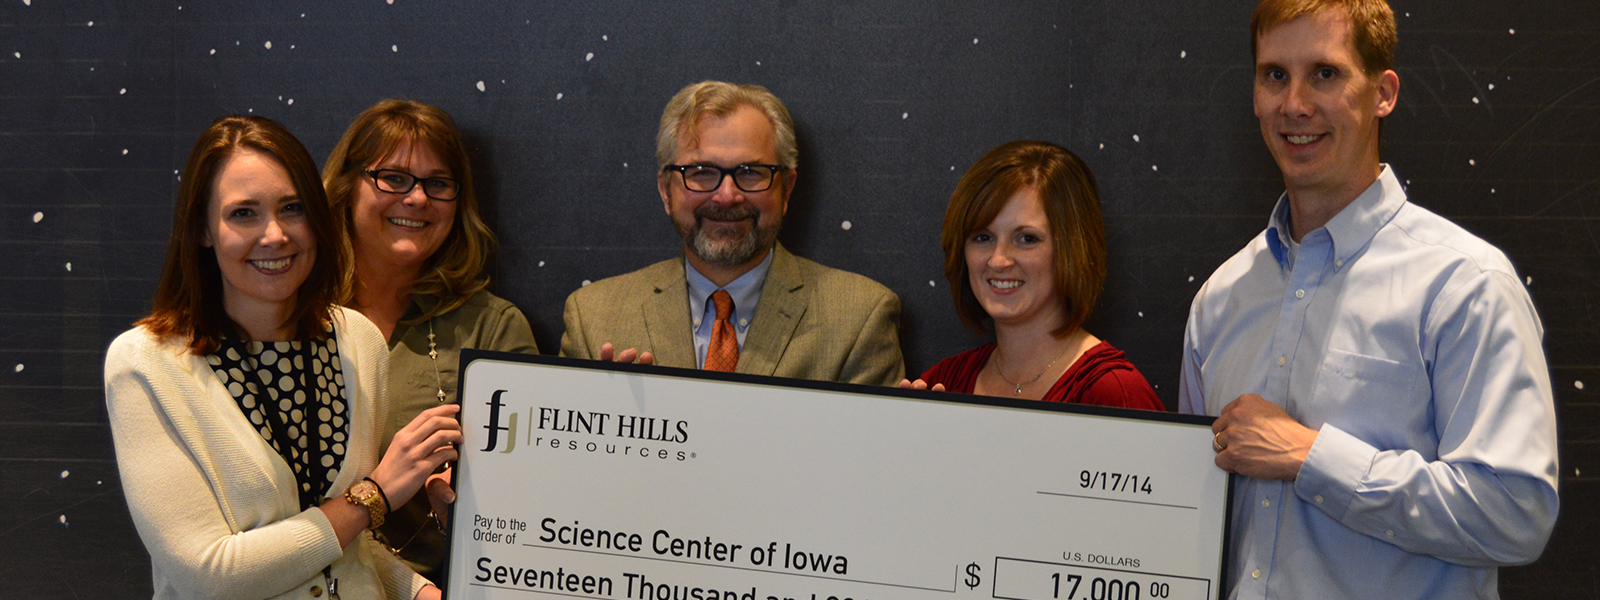 Flint Hills Resources Donates to Science Center of Iowa Education